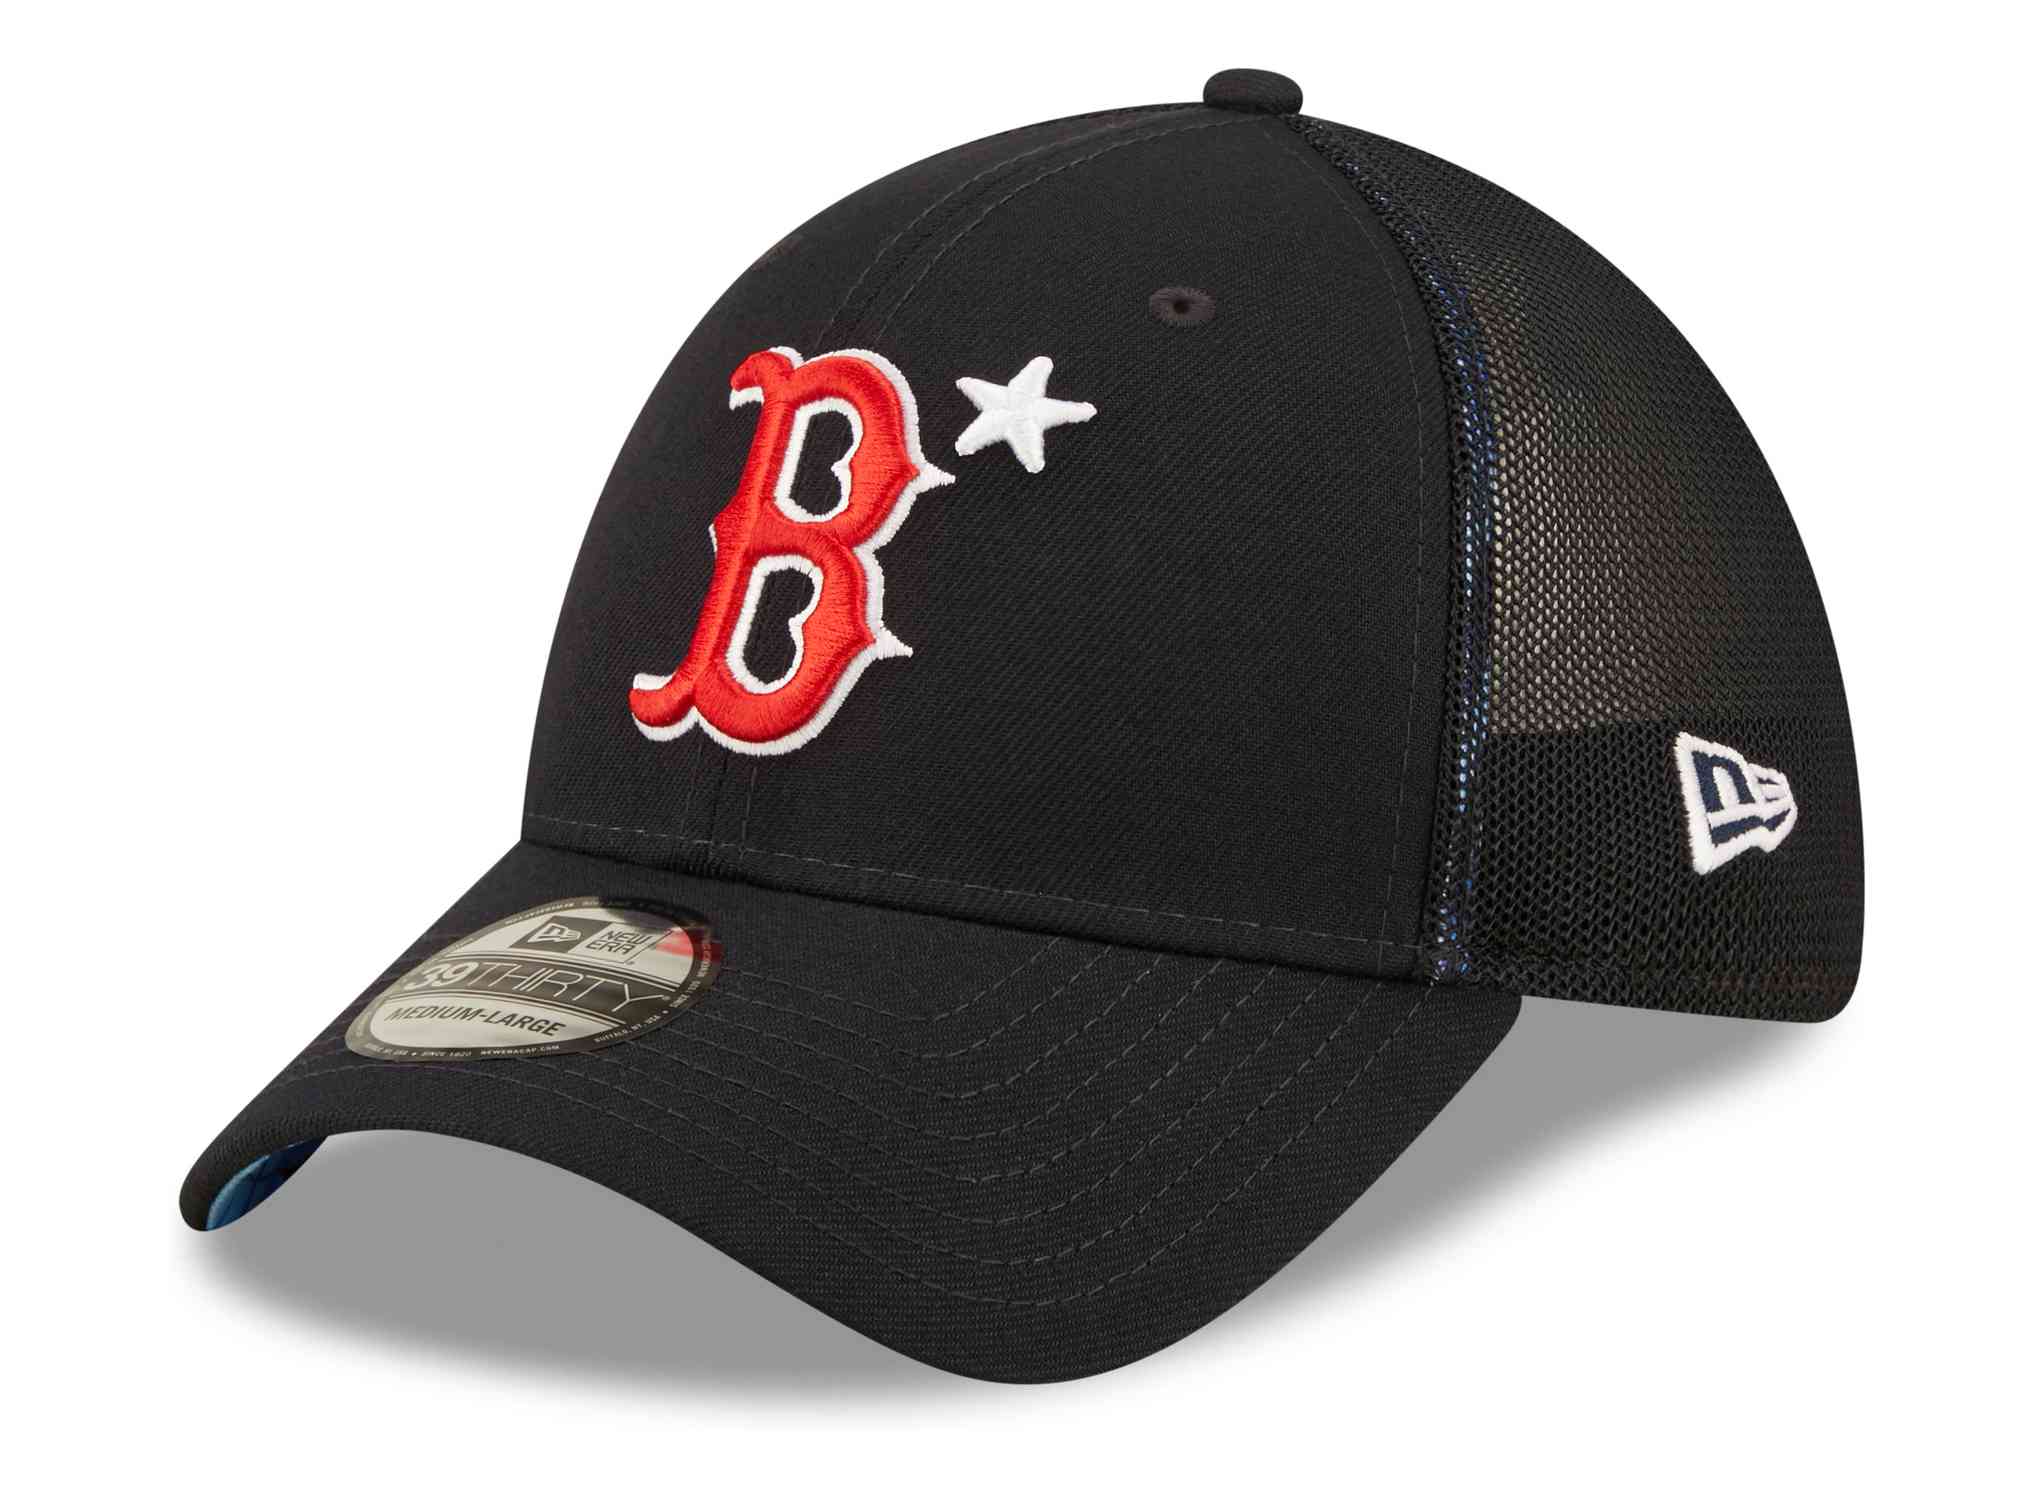 New Era - MLB Boston Red Sox All Star Game Patch 39Thirty